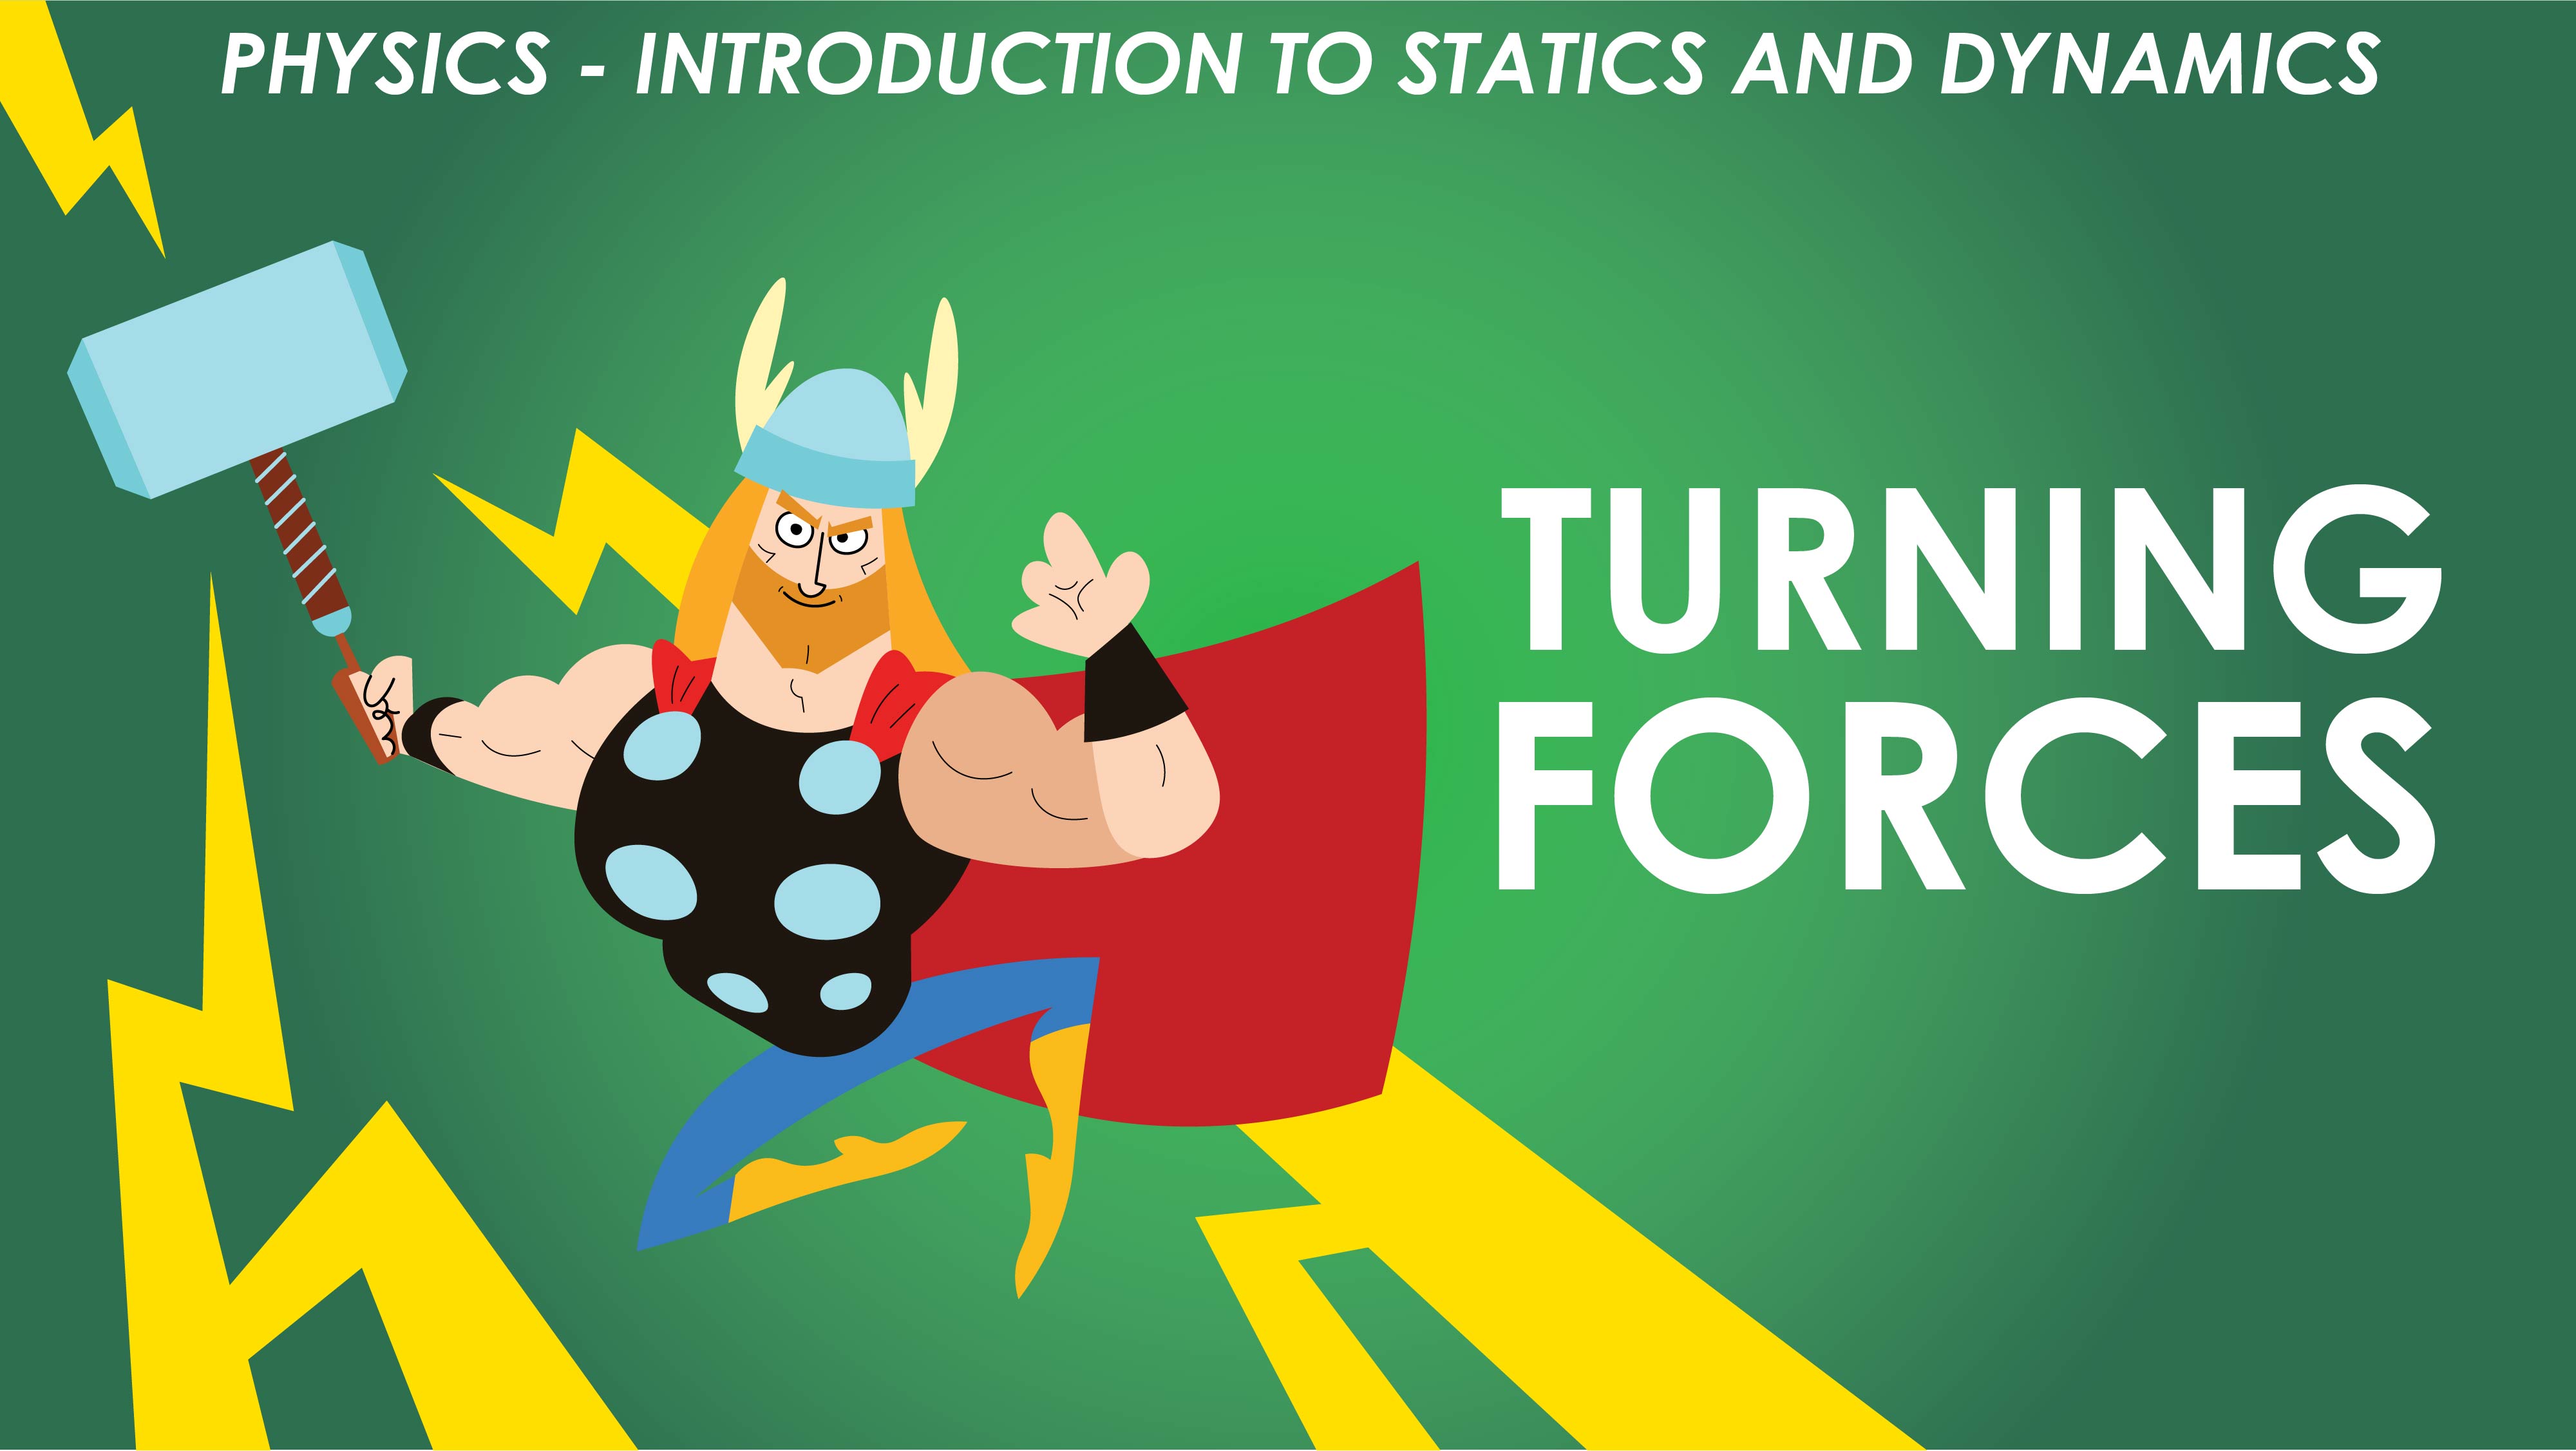 Turning Forces - Forces and Newton’s Laws